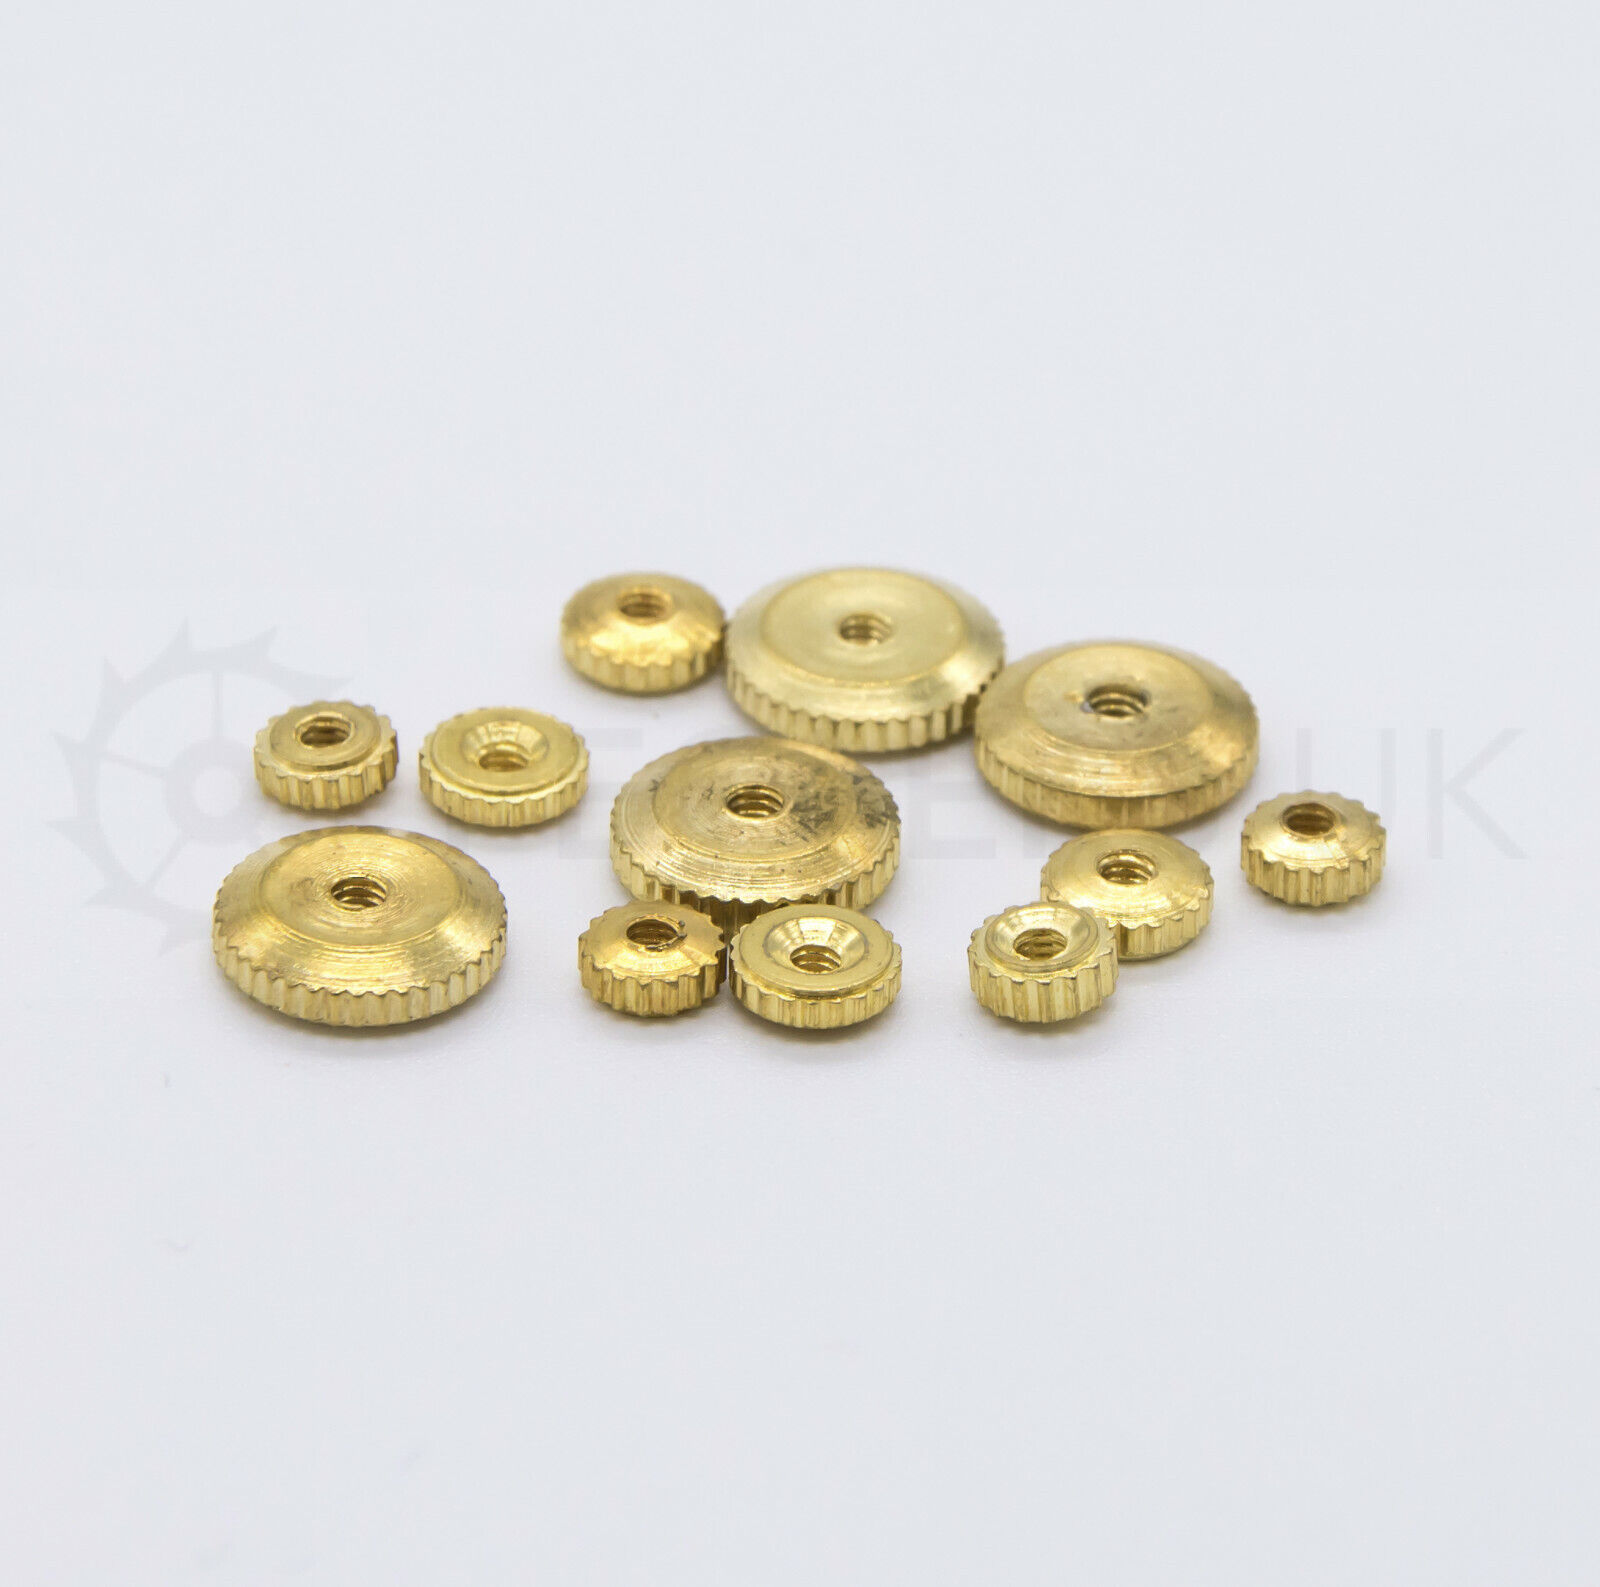 12x Brass Clock hand Nuts - American Hermle metric - Assorted Mixed Sizes